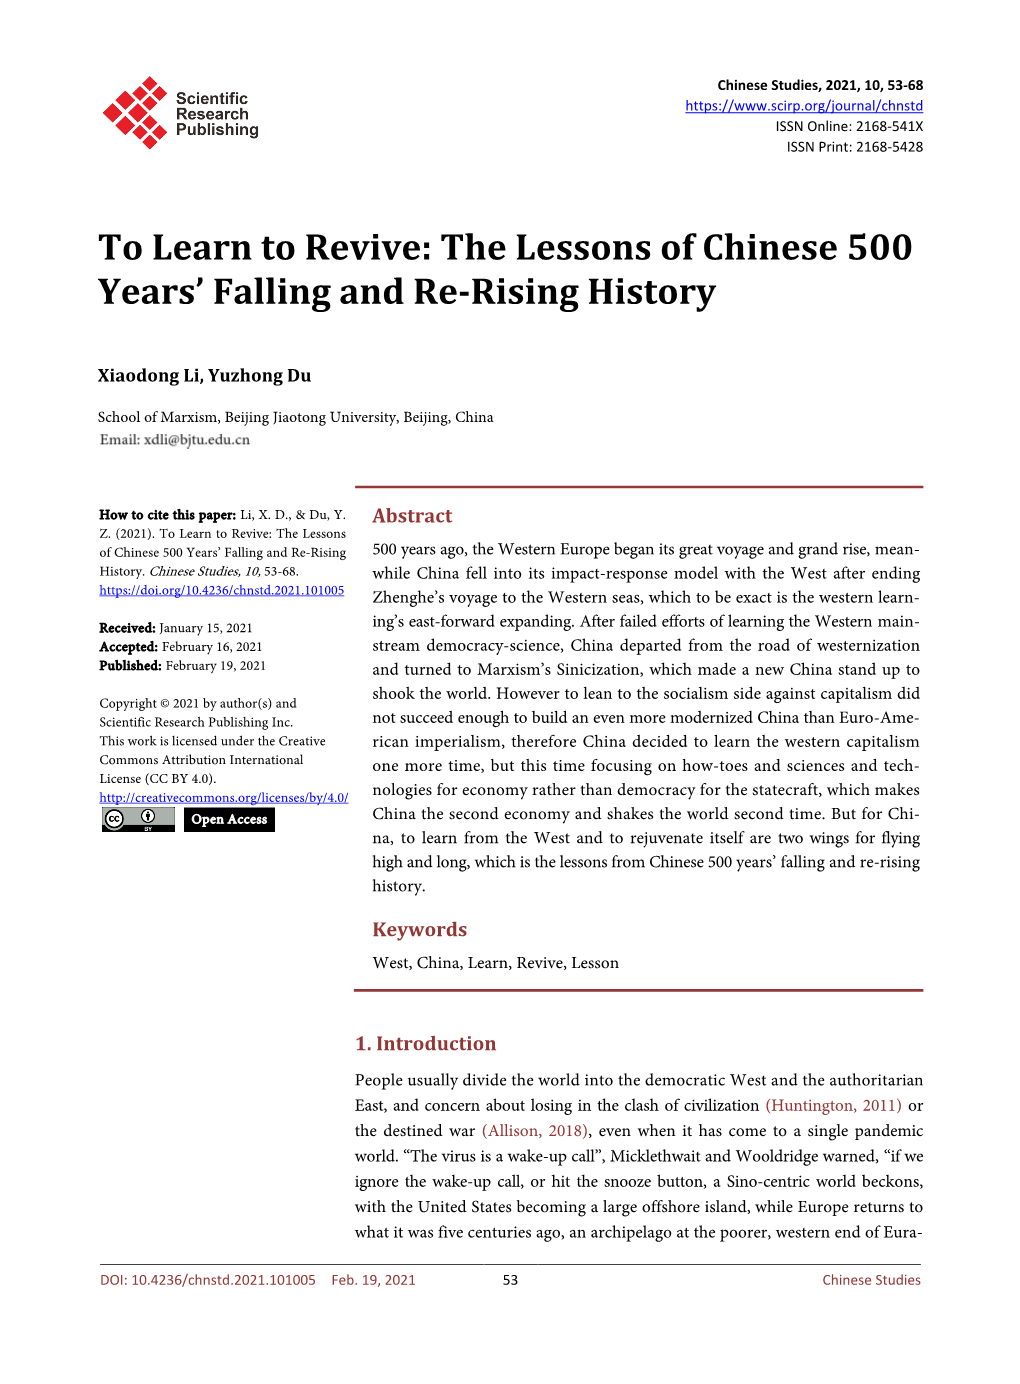 The Lessons of Chinese 500 Years' Falling and Re-Rising History